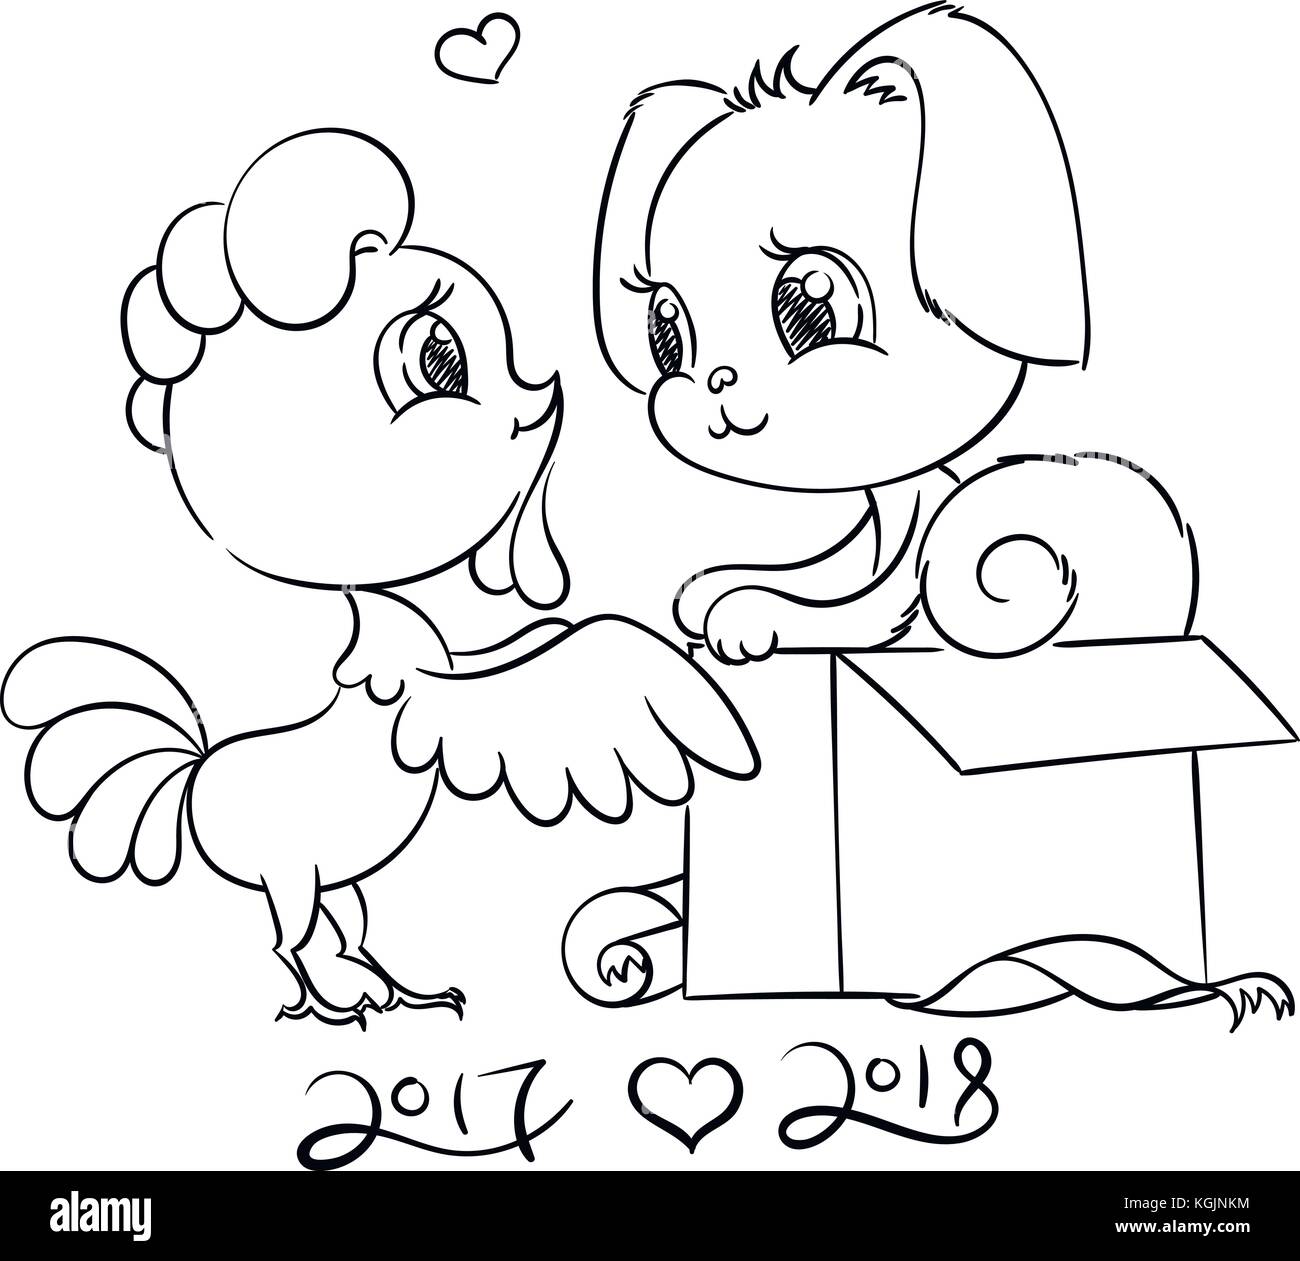 Funny cartoon card with dog and rooster. Symbols of 2017 and 2018. Happy  New Year vector illustration with human friends cute animals Stock Vector  Image & Art - Alamy